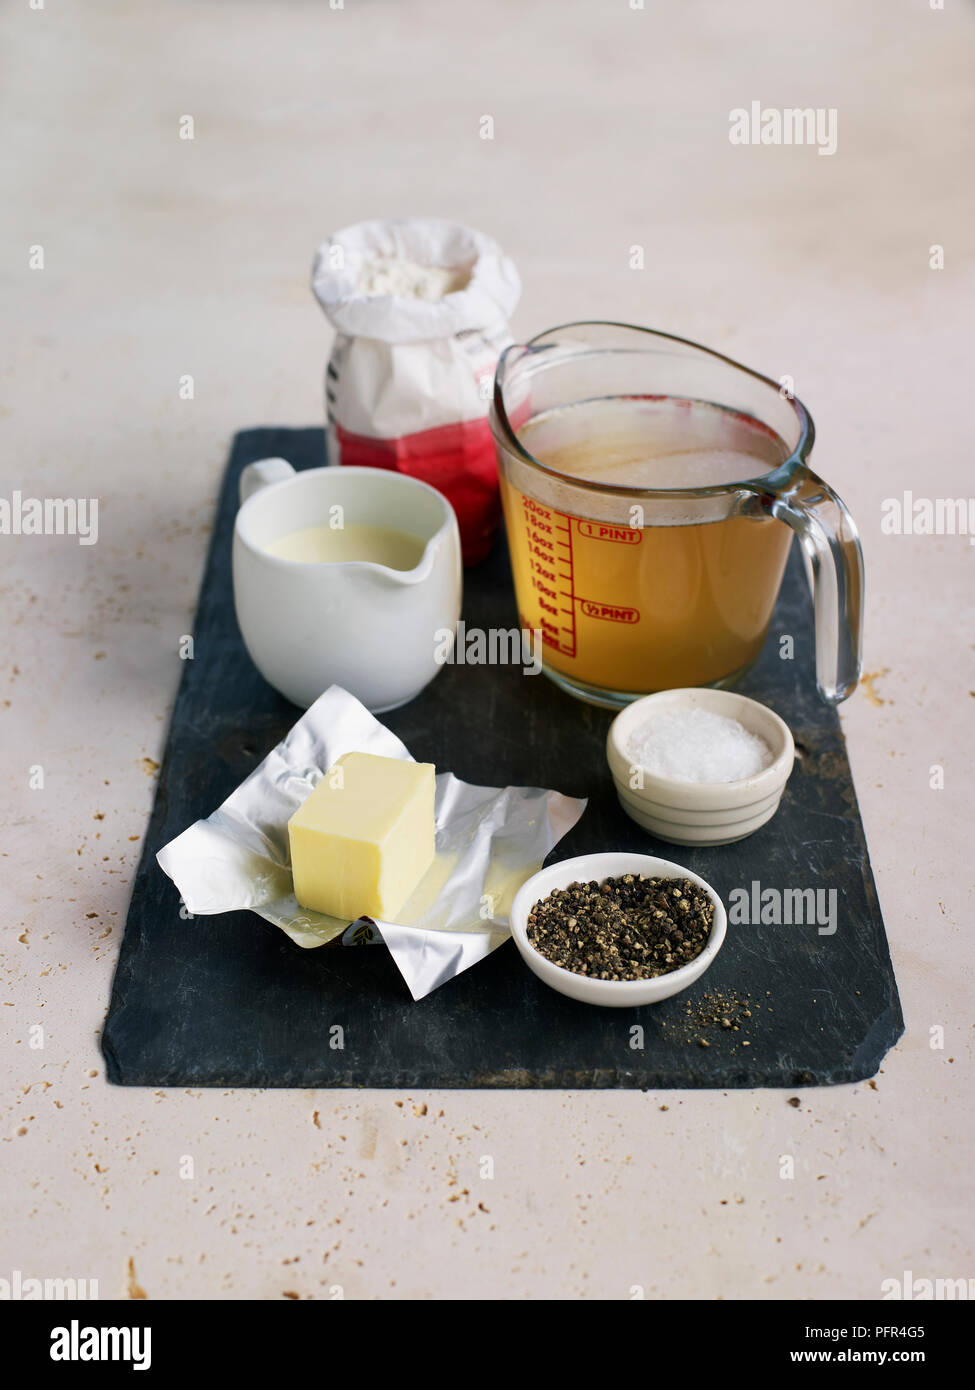 Ingredients for cooking veloute sauce, flour, chicken or veal stock, double cream, butter, salt, pepper Stock Photo